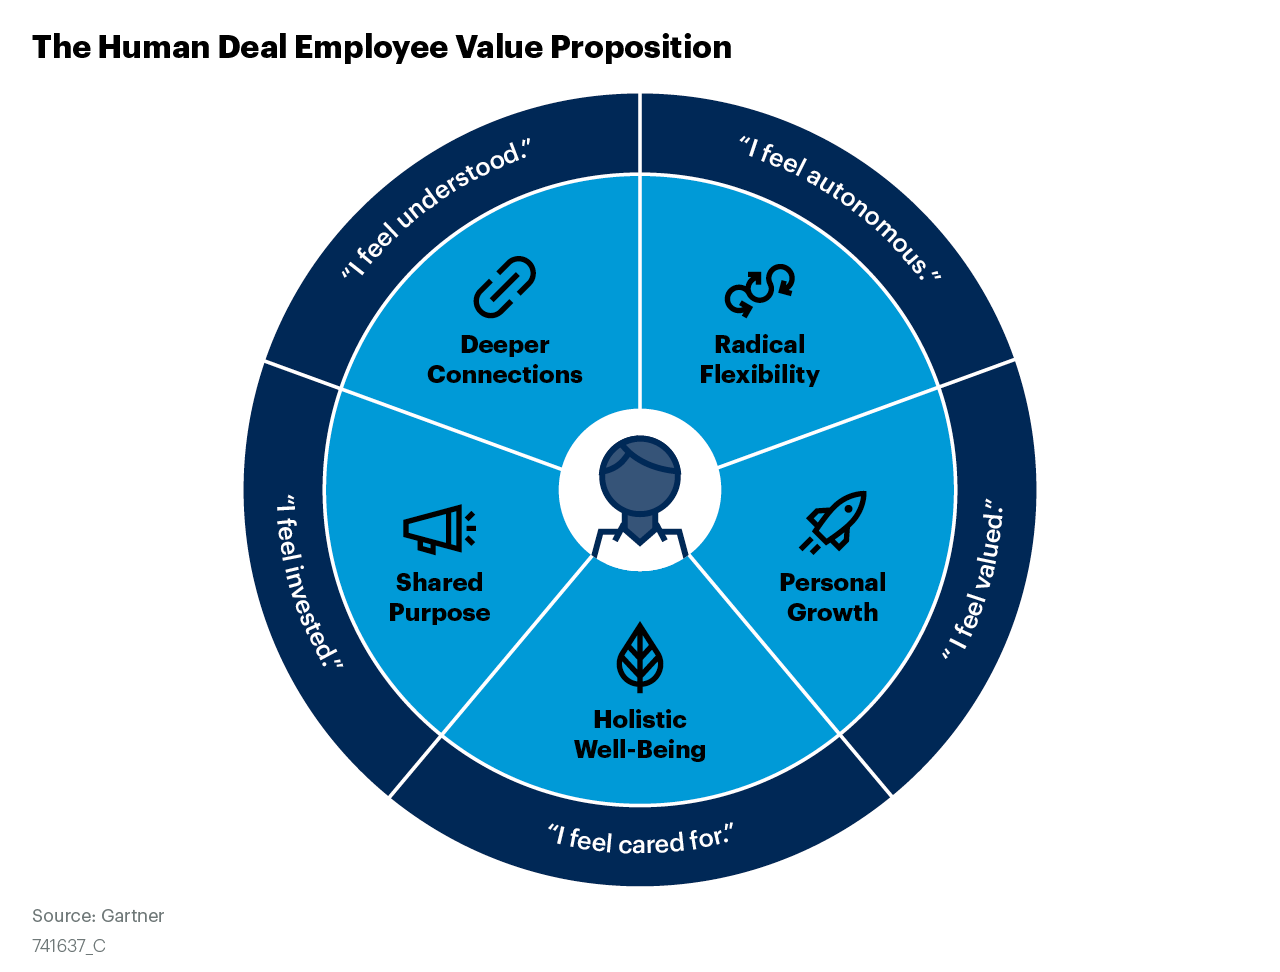 An infographic depicting the human deal employee value proposition